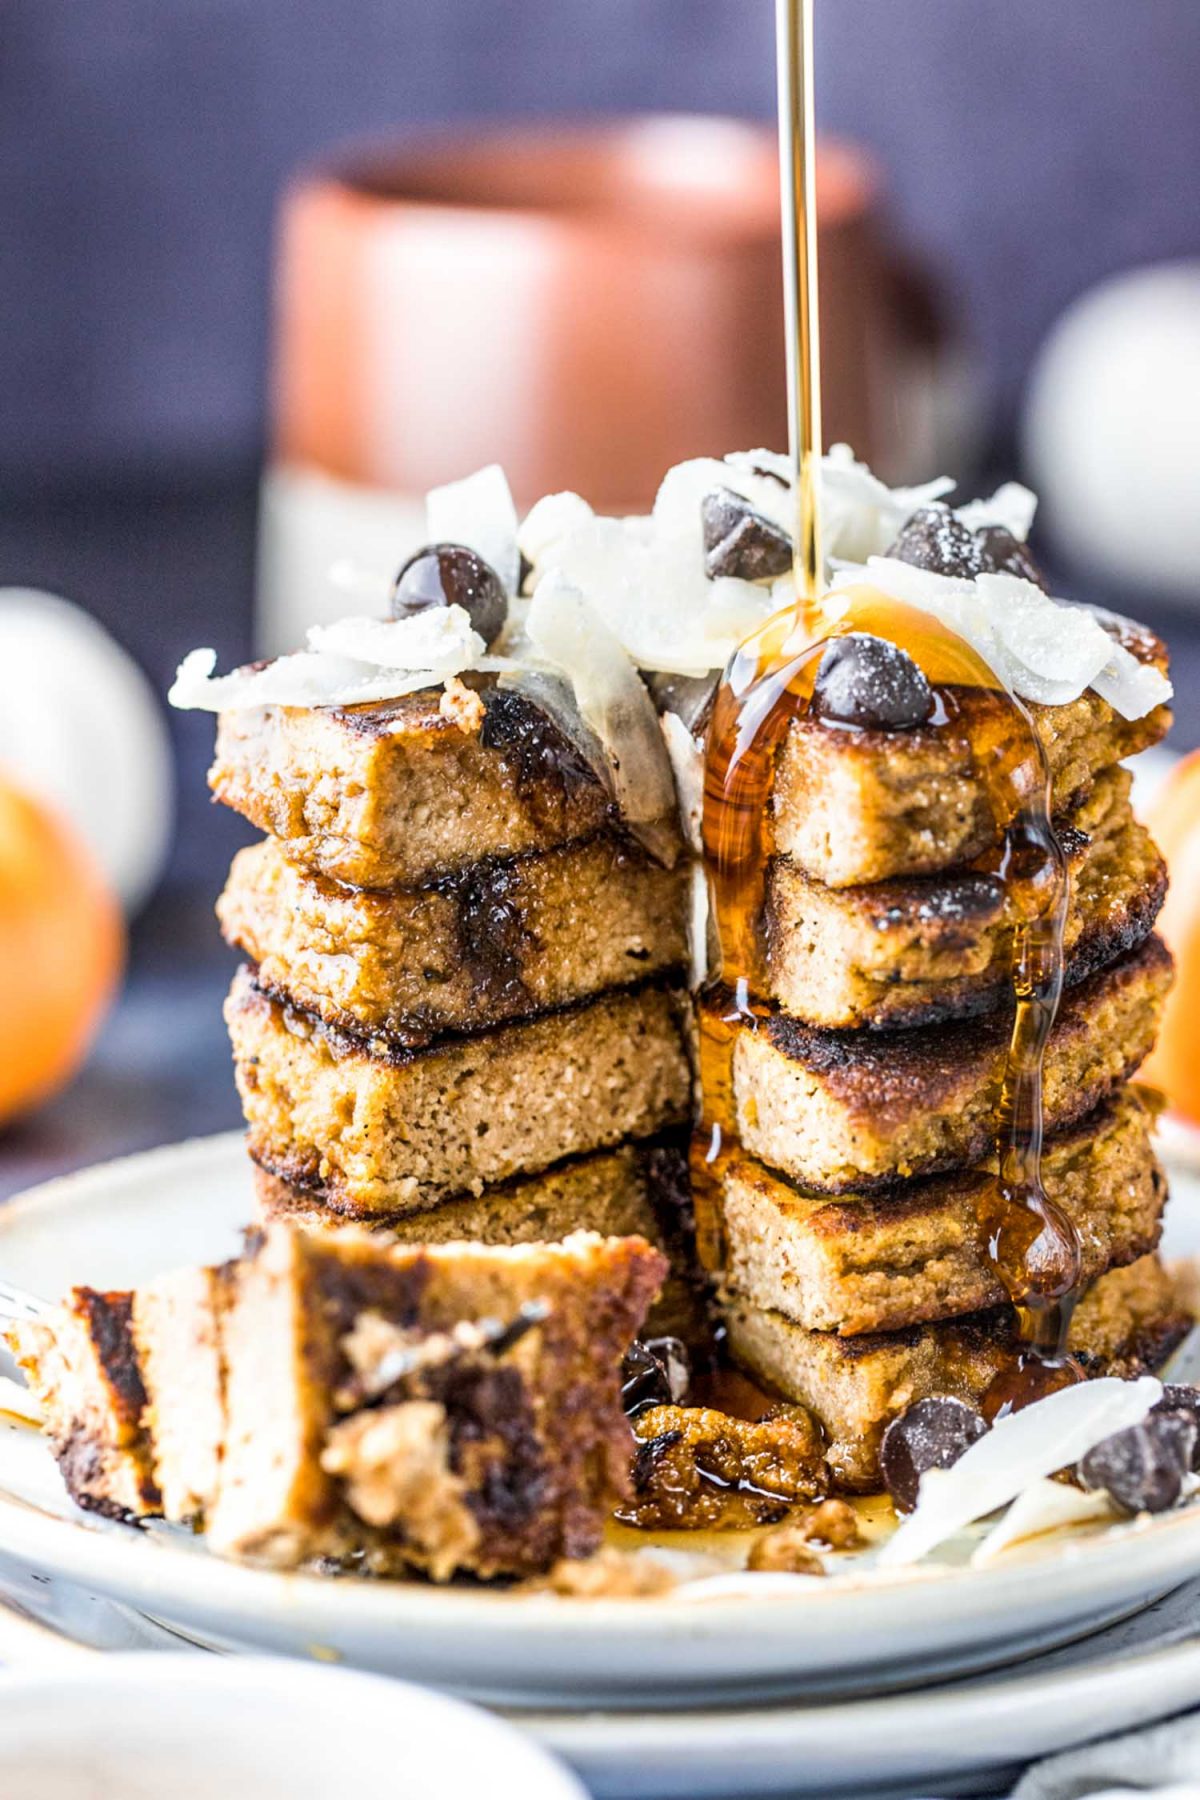 Keto Pumpkin Pancakes with Chocolate Chips